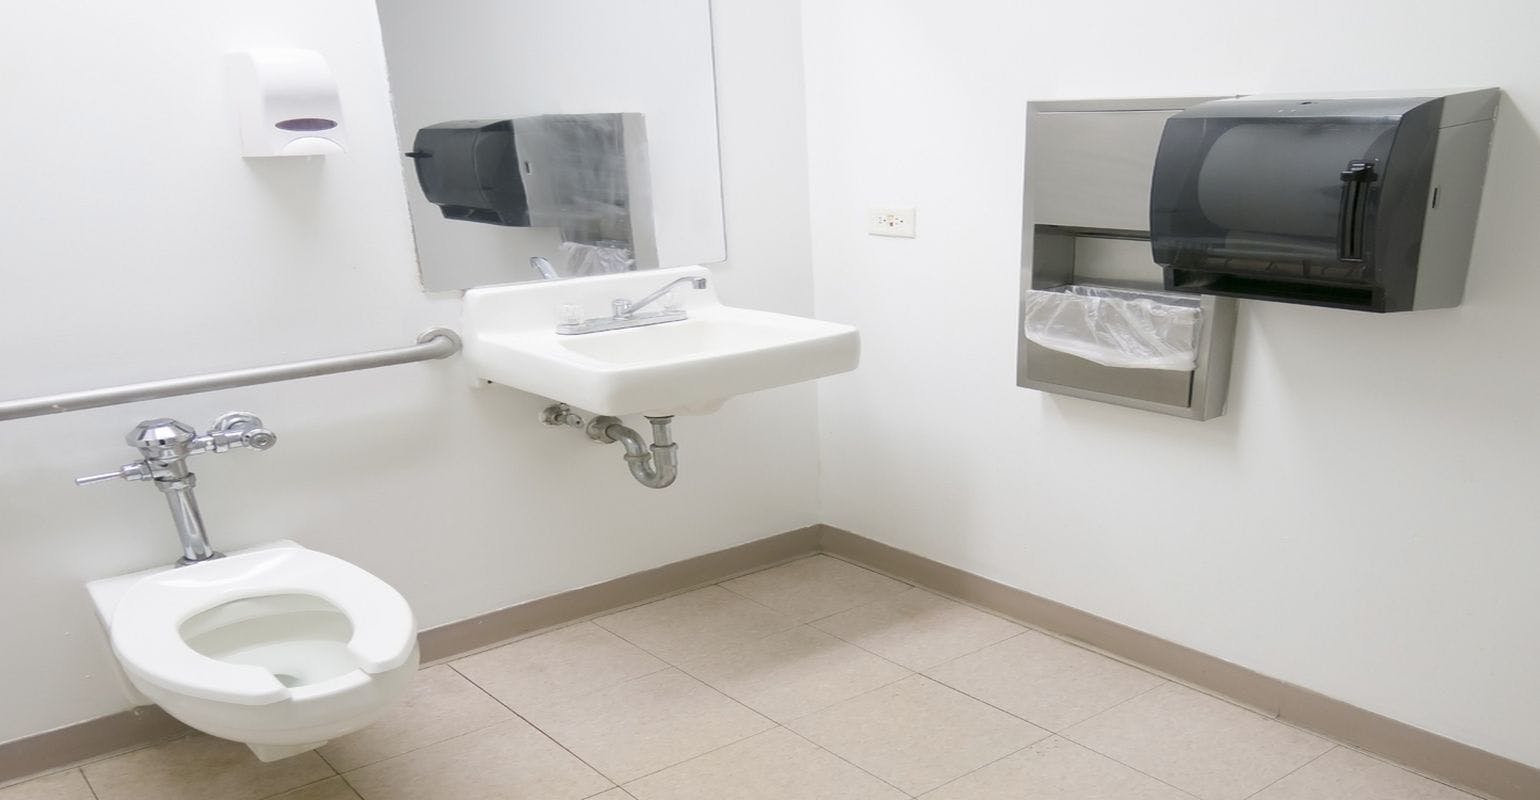 Sinks Next to Toilets in Patient Rooms May Harbor Dangerous Organisms